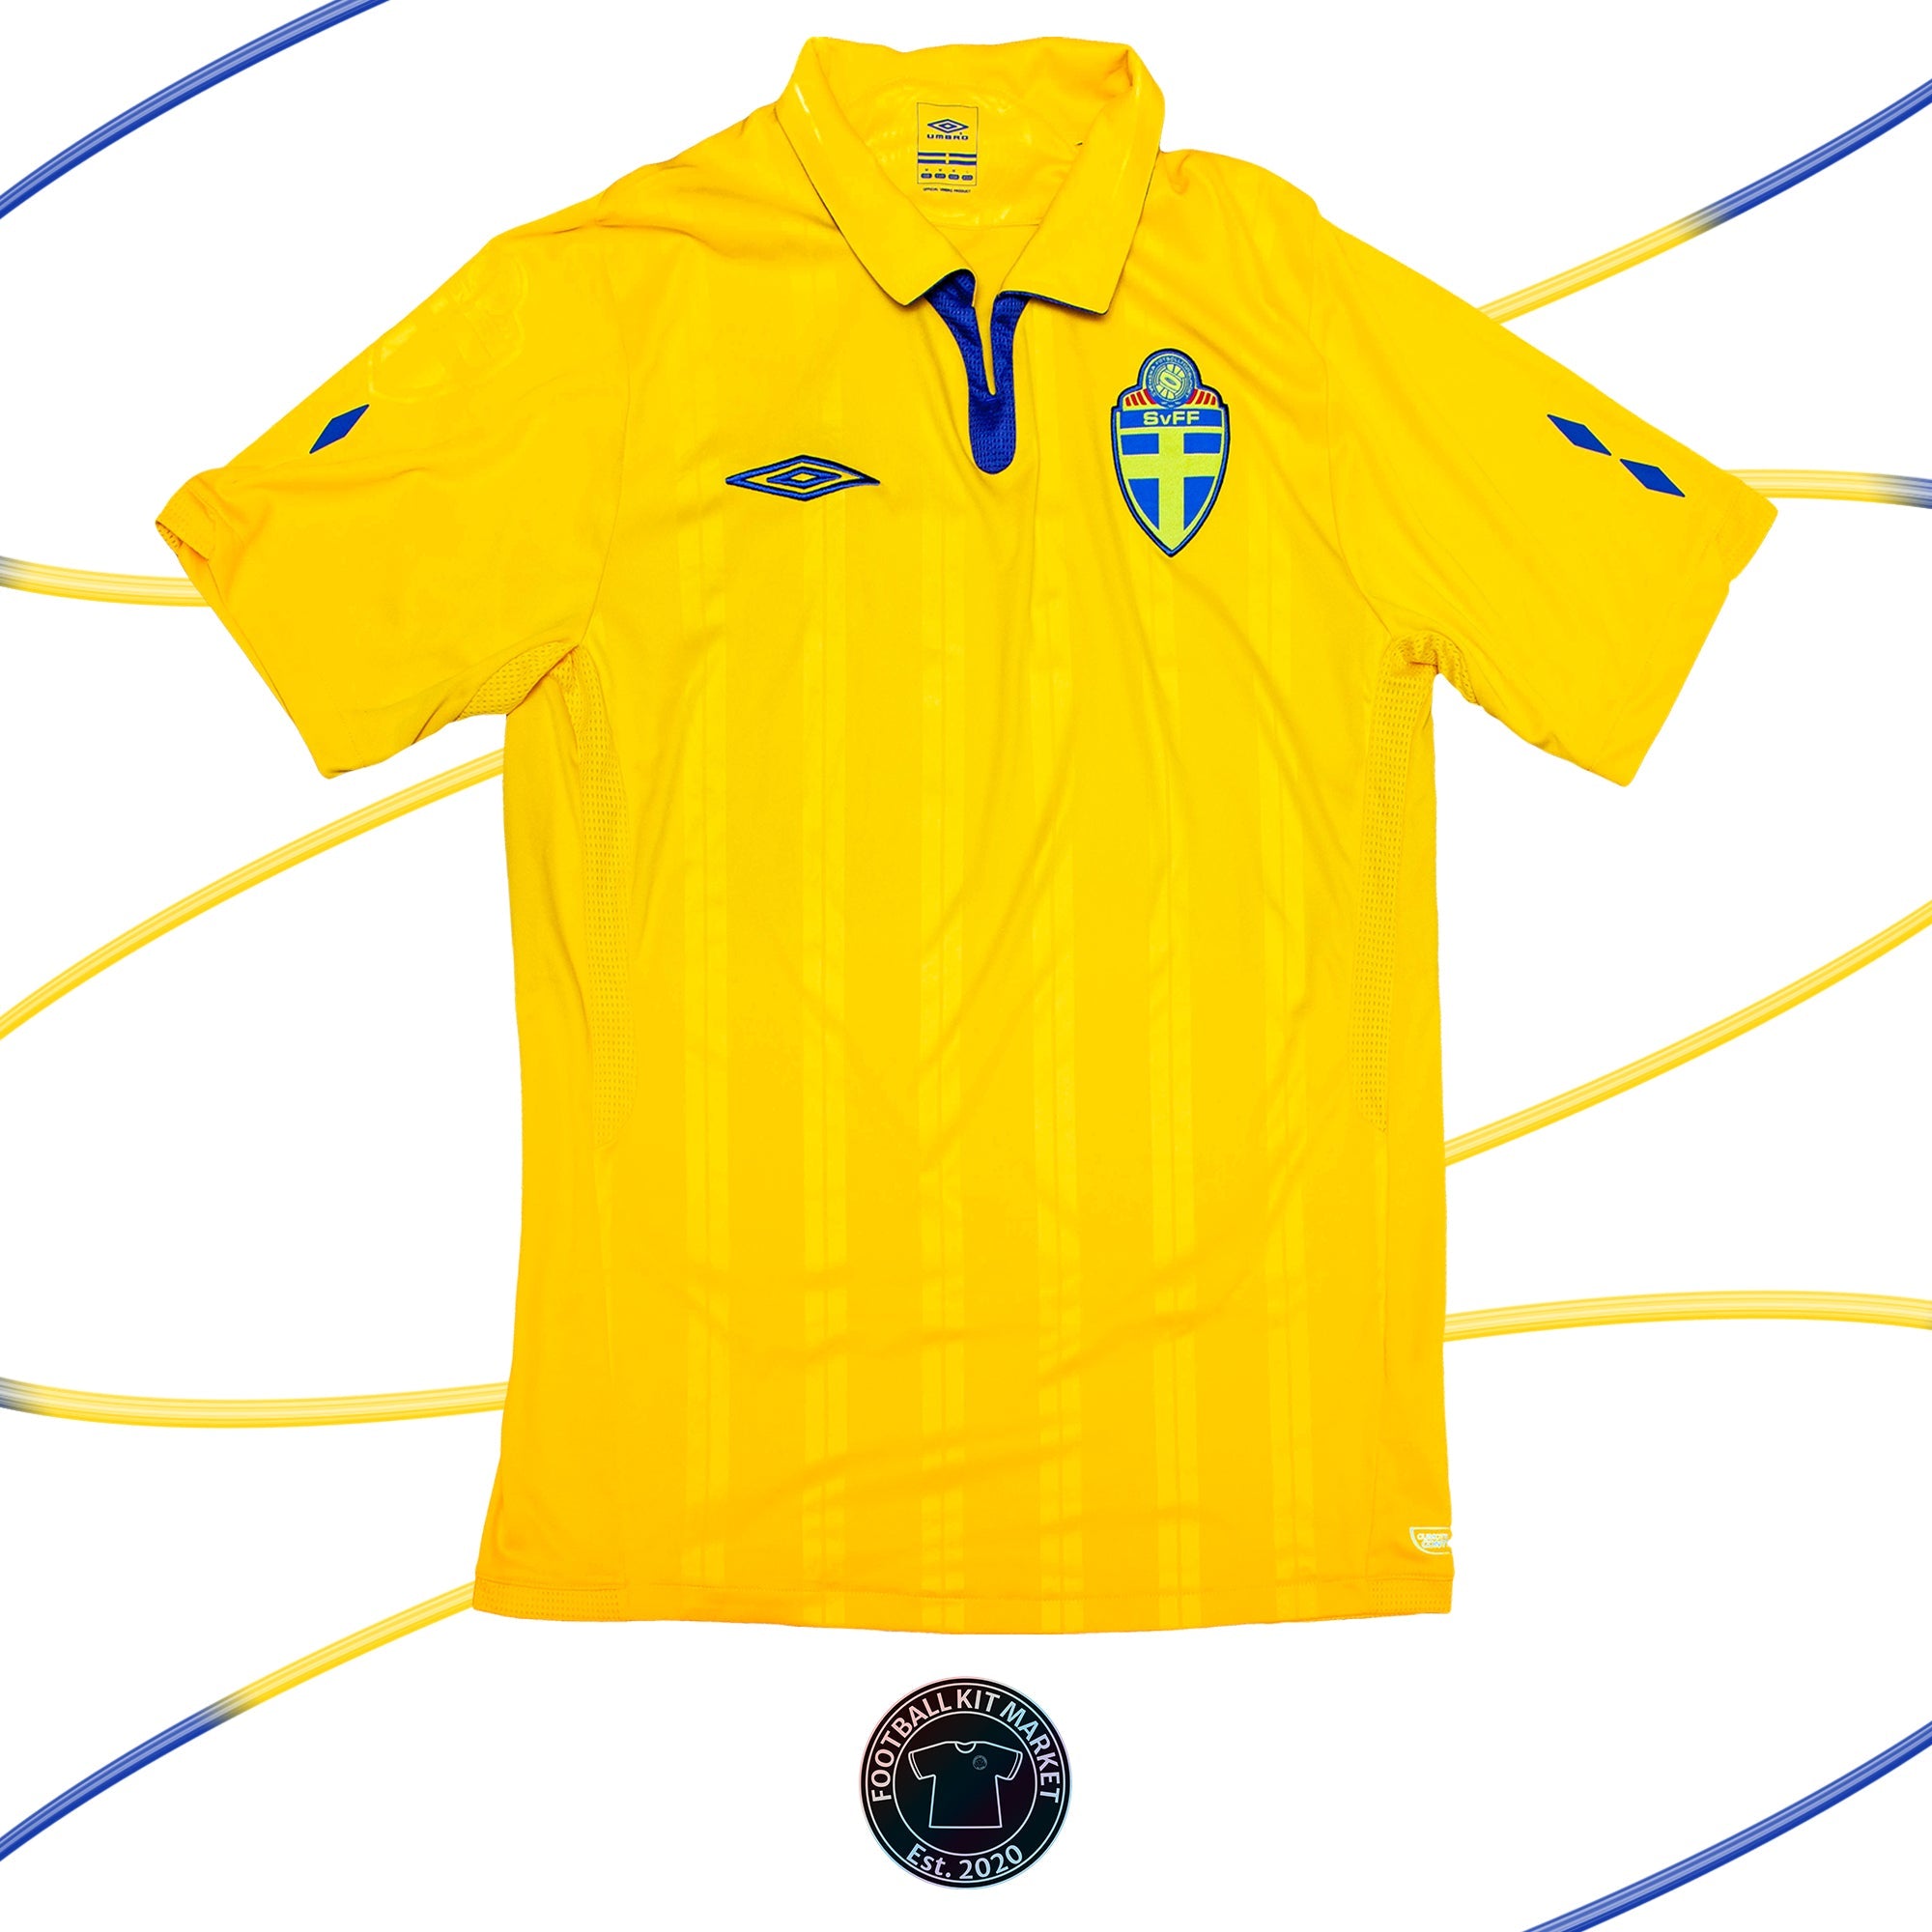 Genuine SWEDEN Home (2009-2010) - UMBRO (M) - Product Image from Football Kit Market